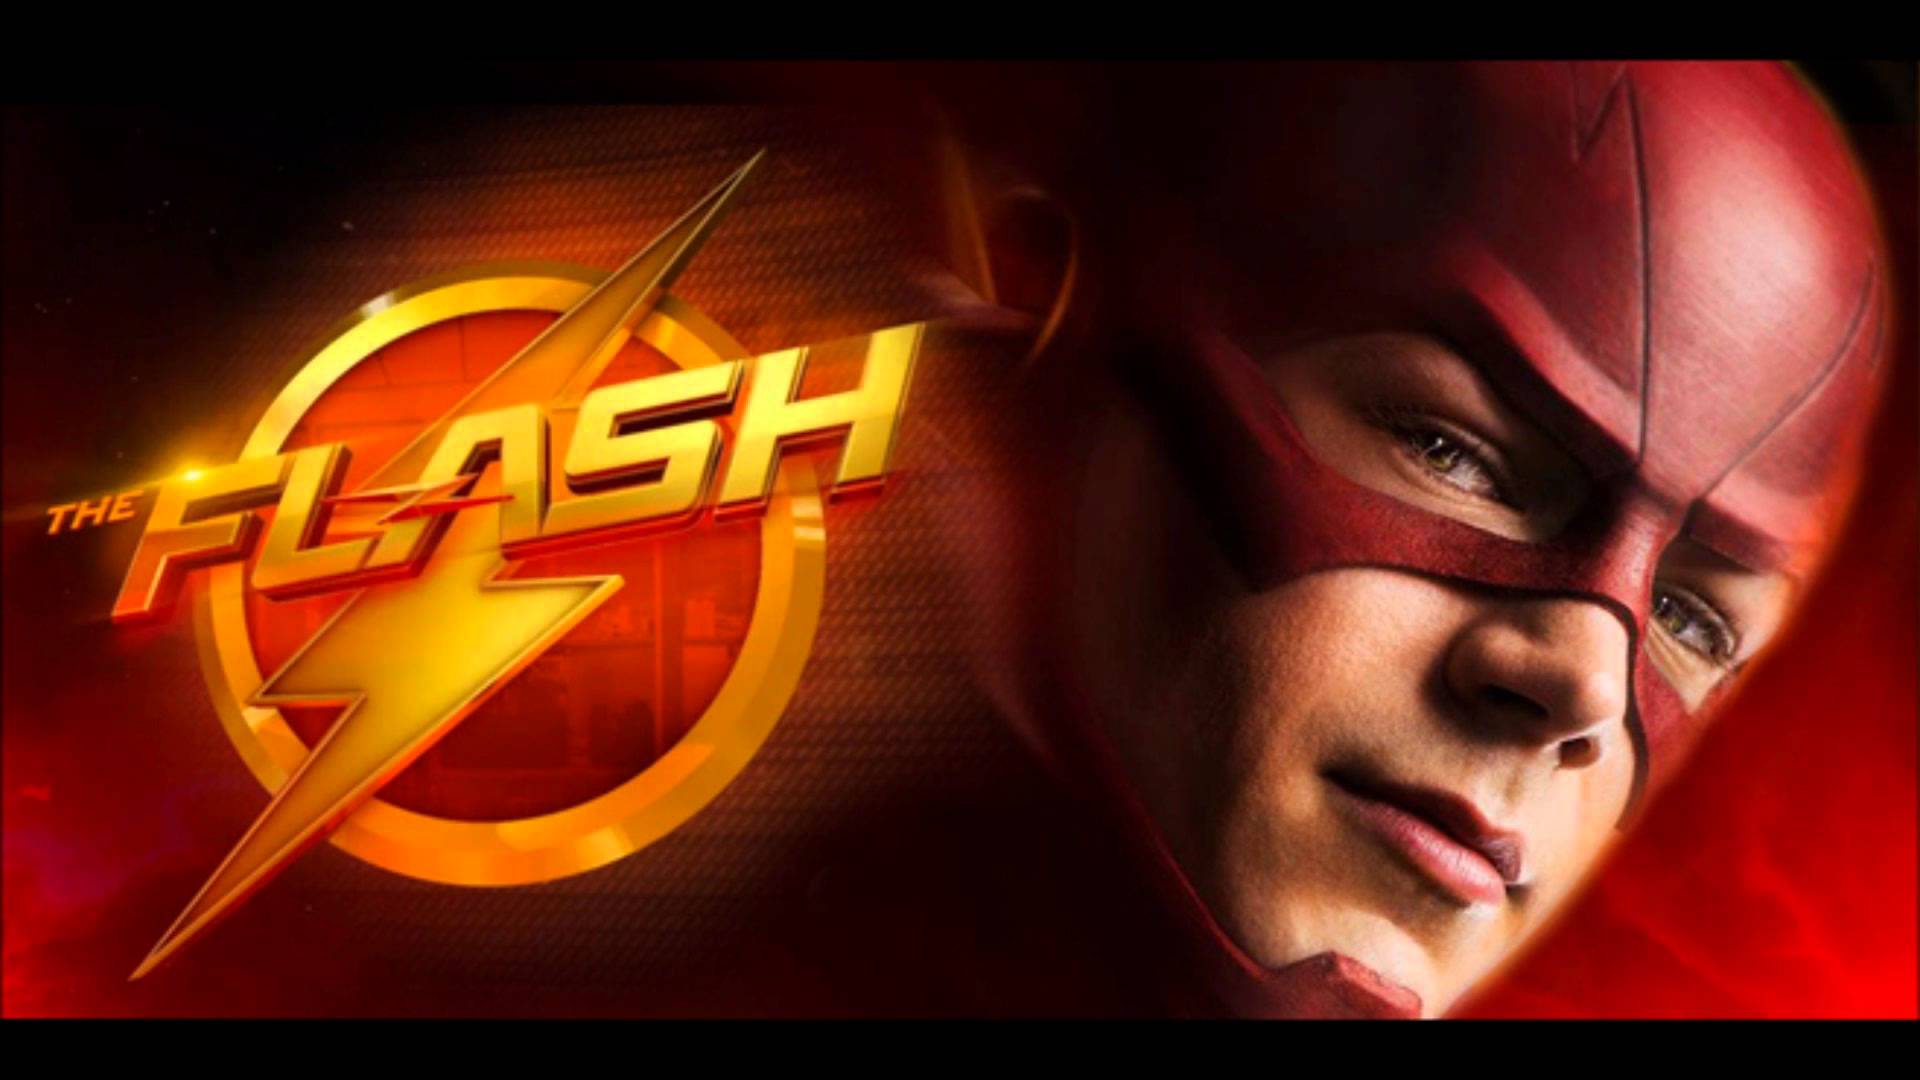 The Flash Soundtrack: My Name Is Barry Allen 1x23 Enough